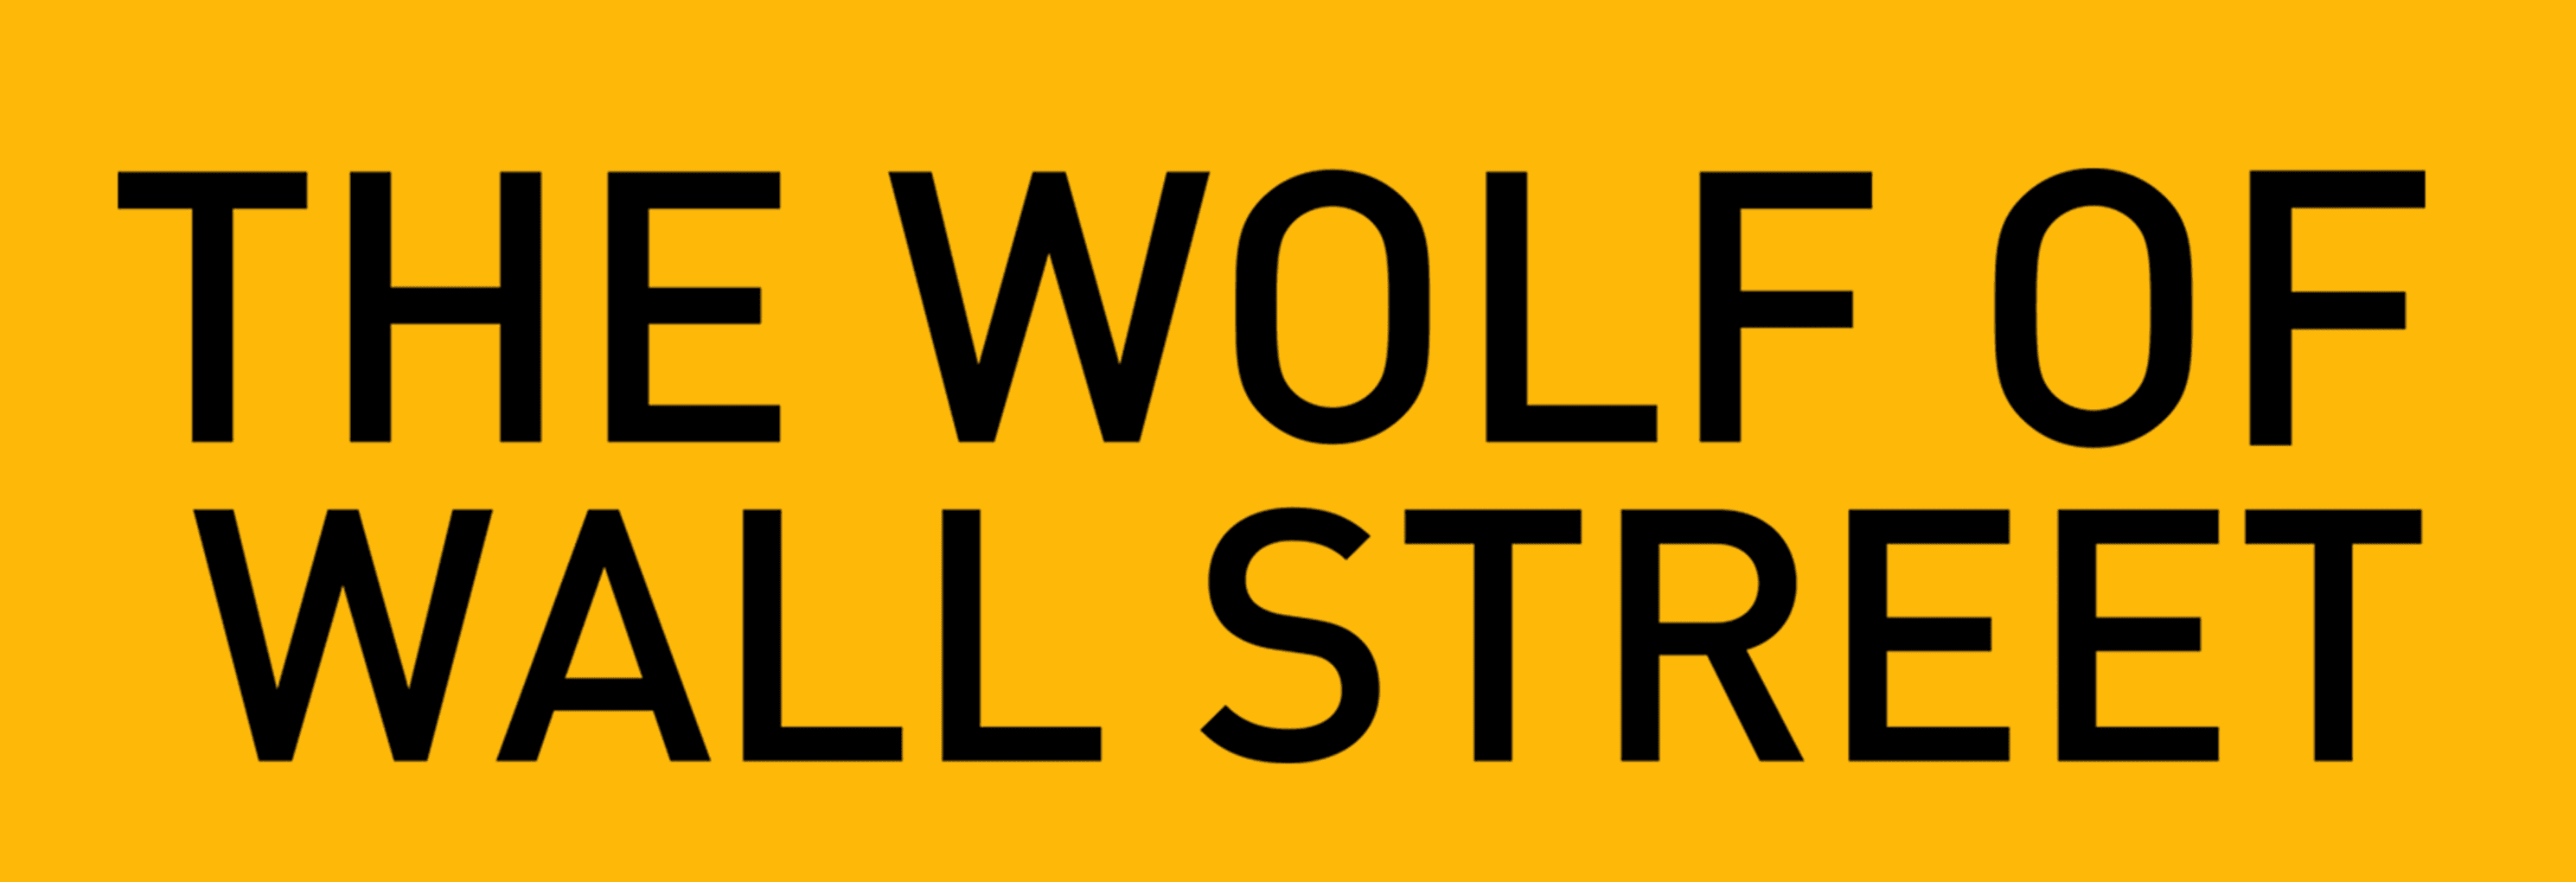 The Wolf of Wall Street logo